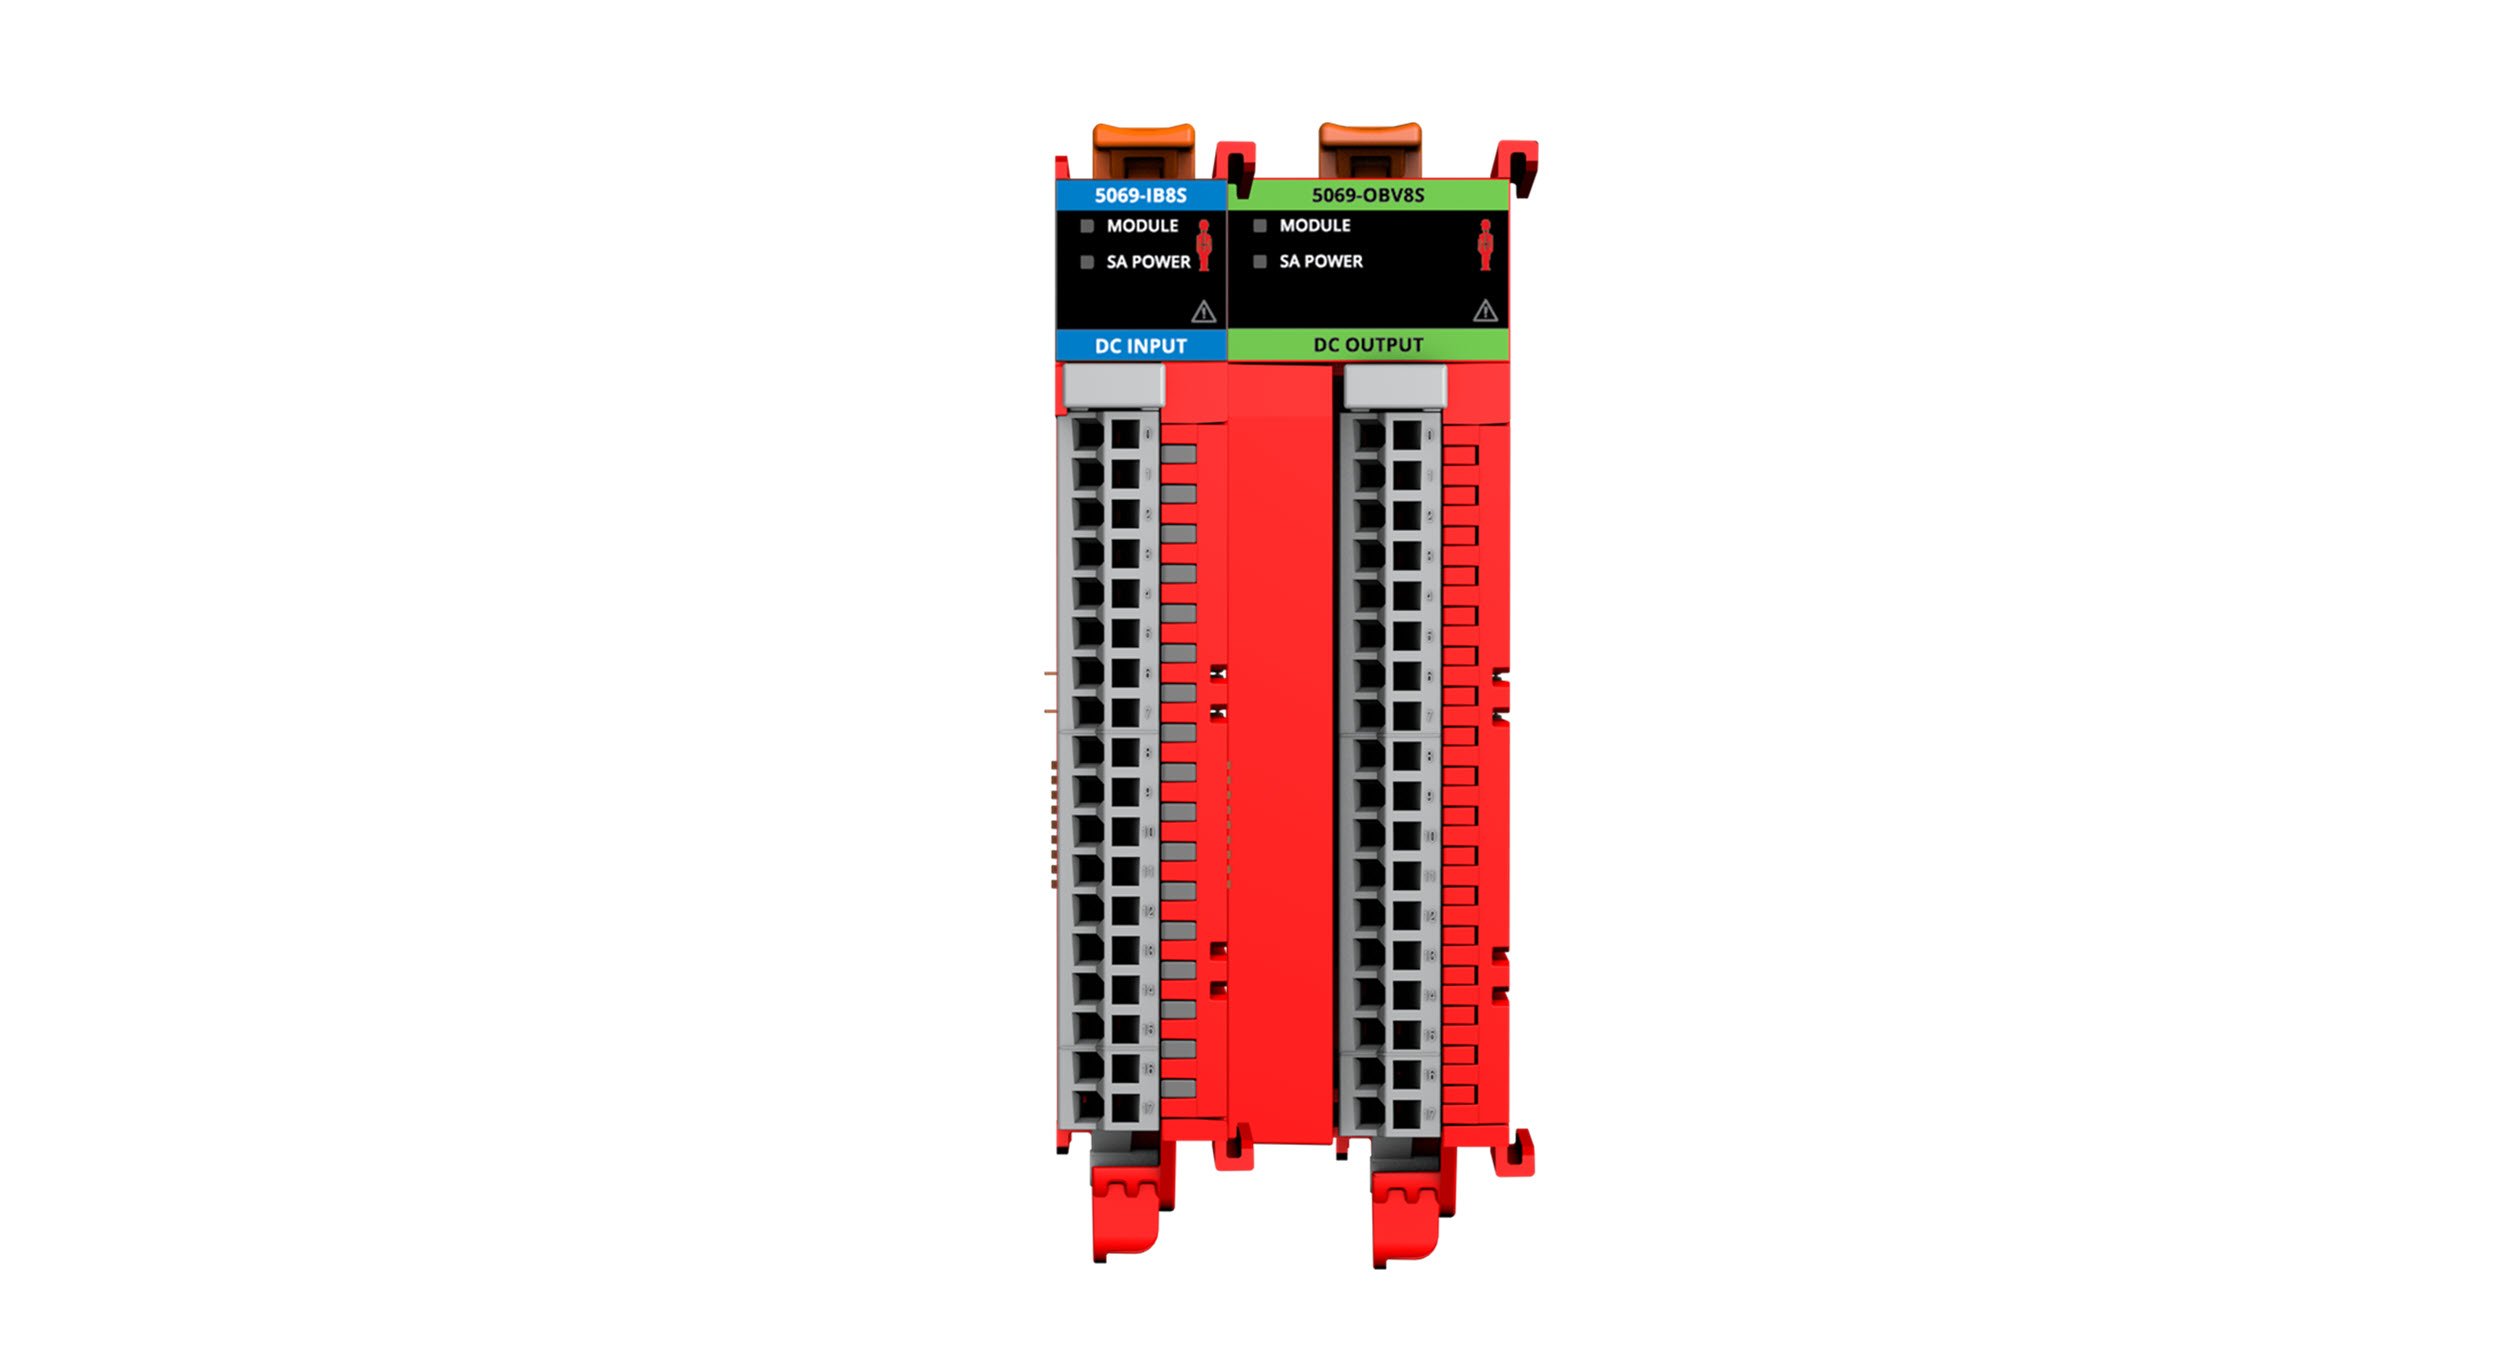 Front-facing view of Allen-Bradley Compact 5000 safety I/O modules catalogs 5069-IB8S and 5069-OBV8S